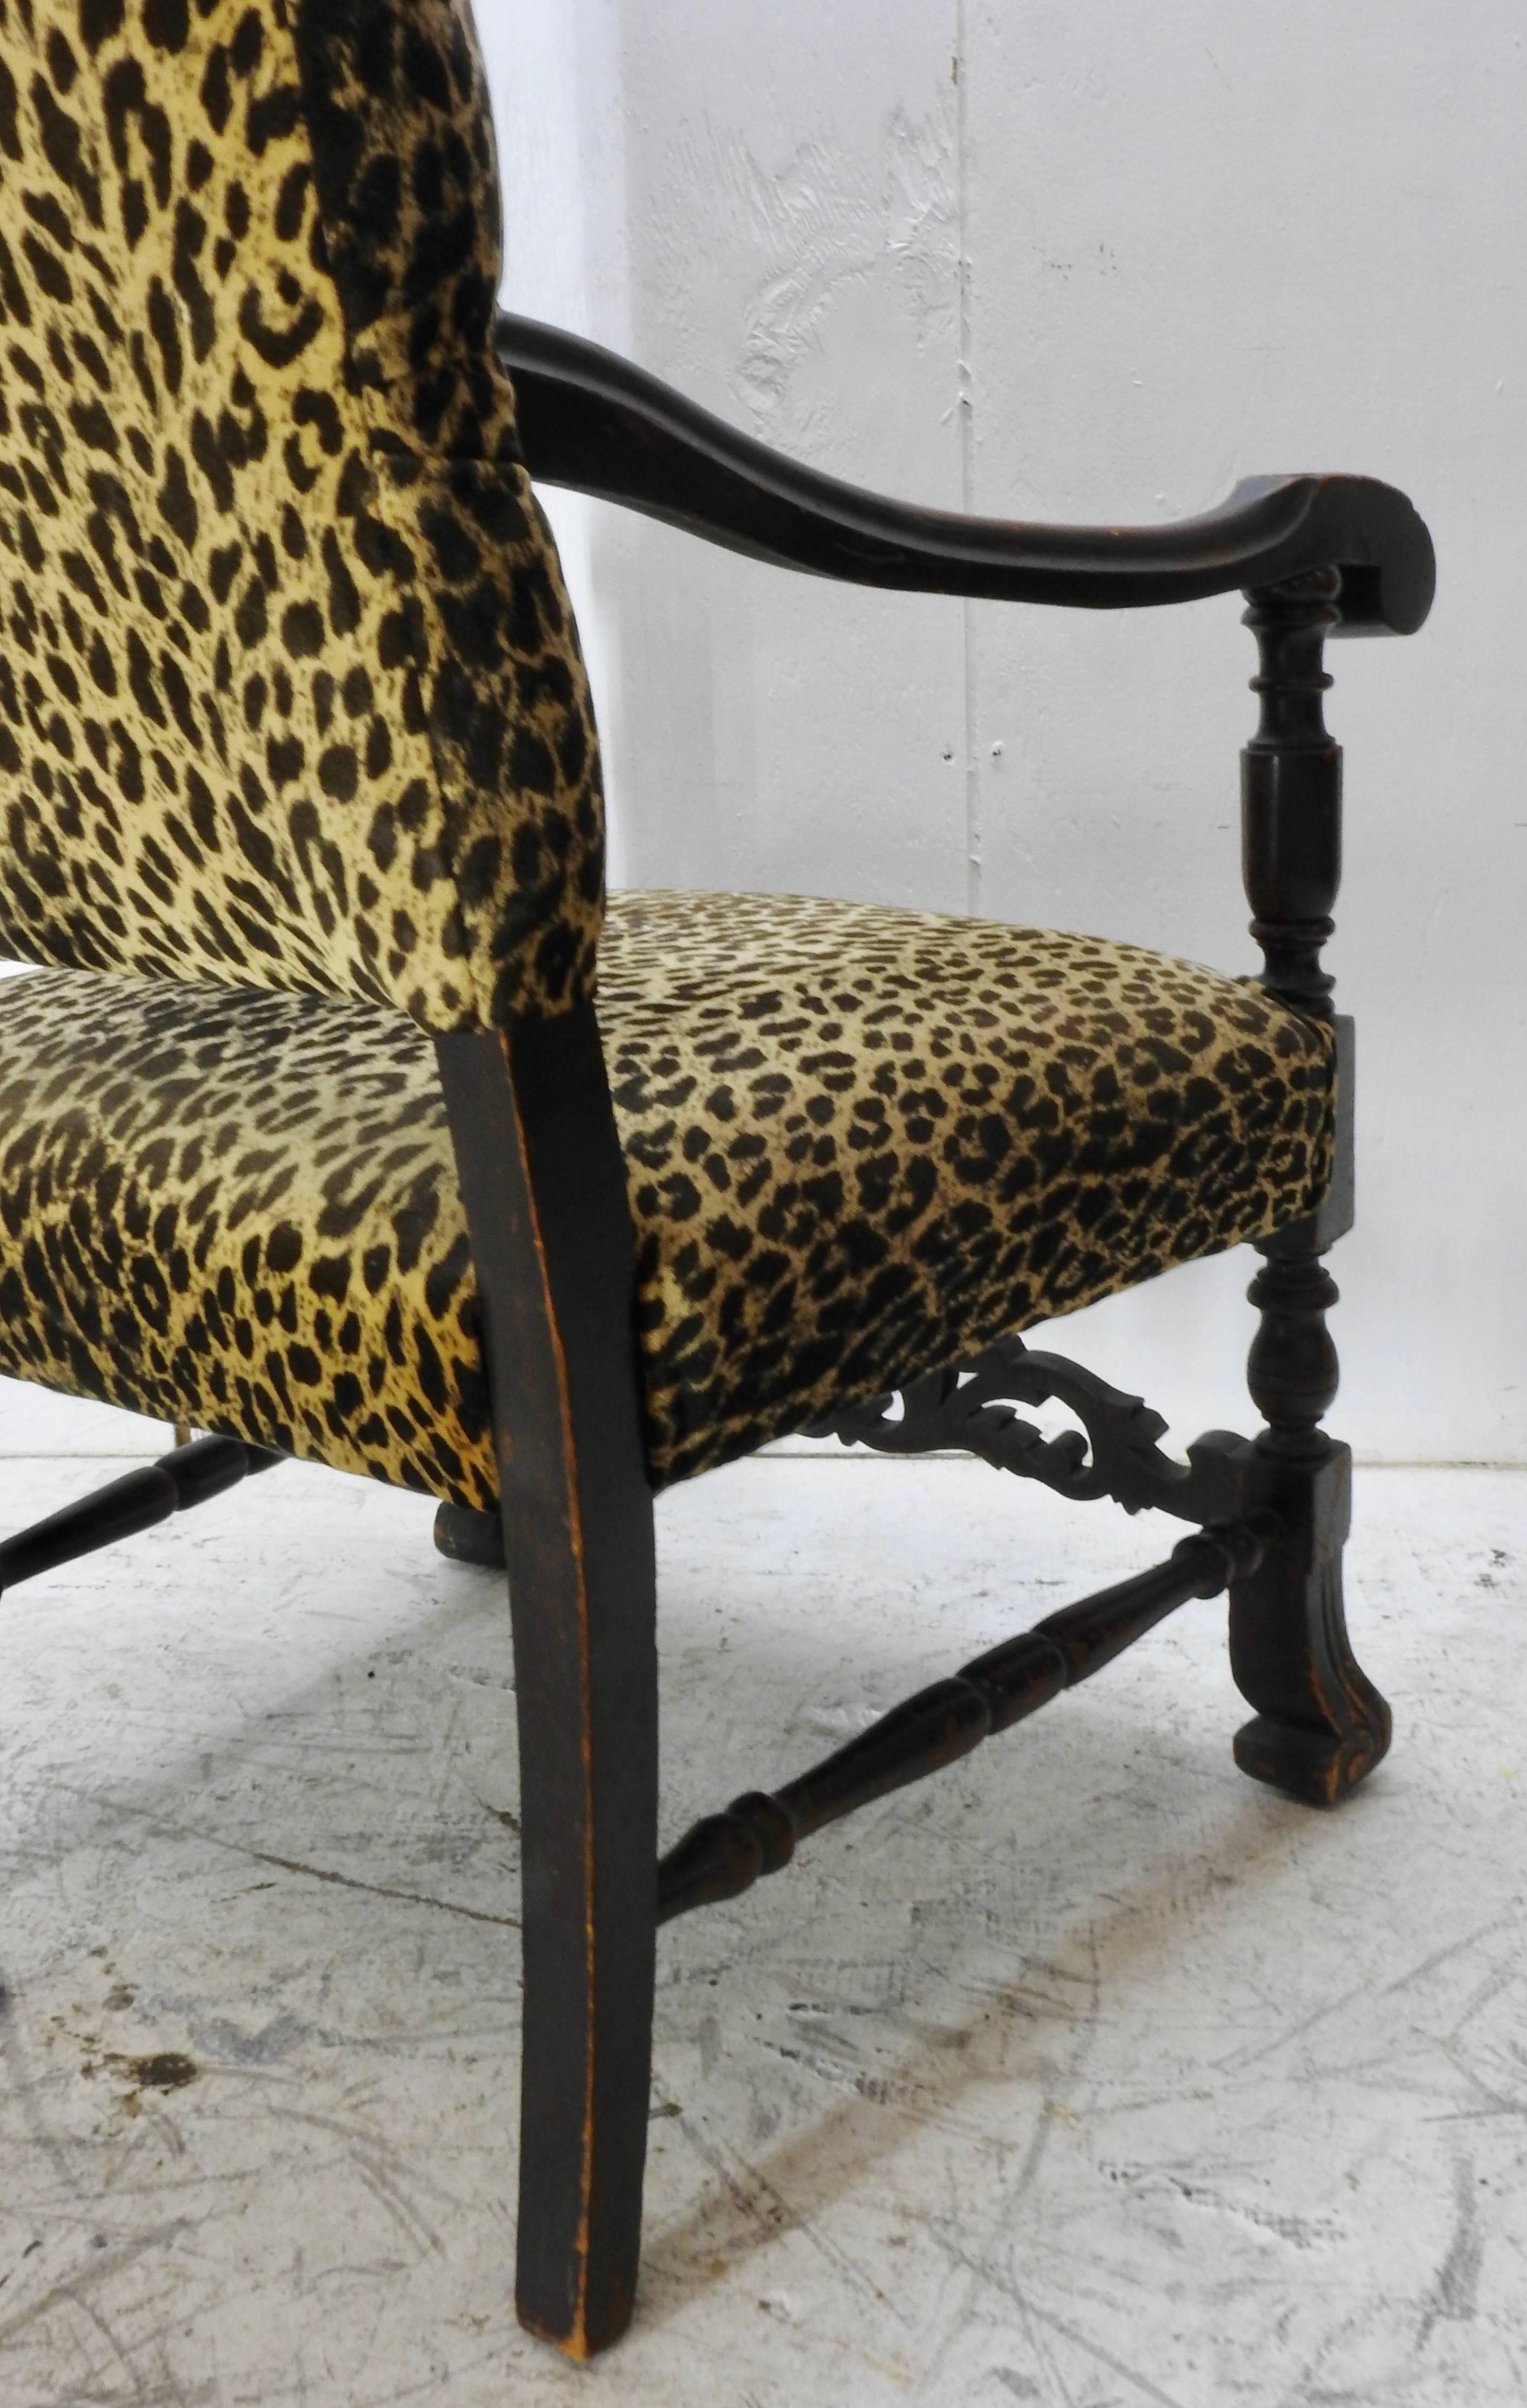 19th Century German Hand-Carved High Back Chair with Leopard Print Upholstery 2